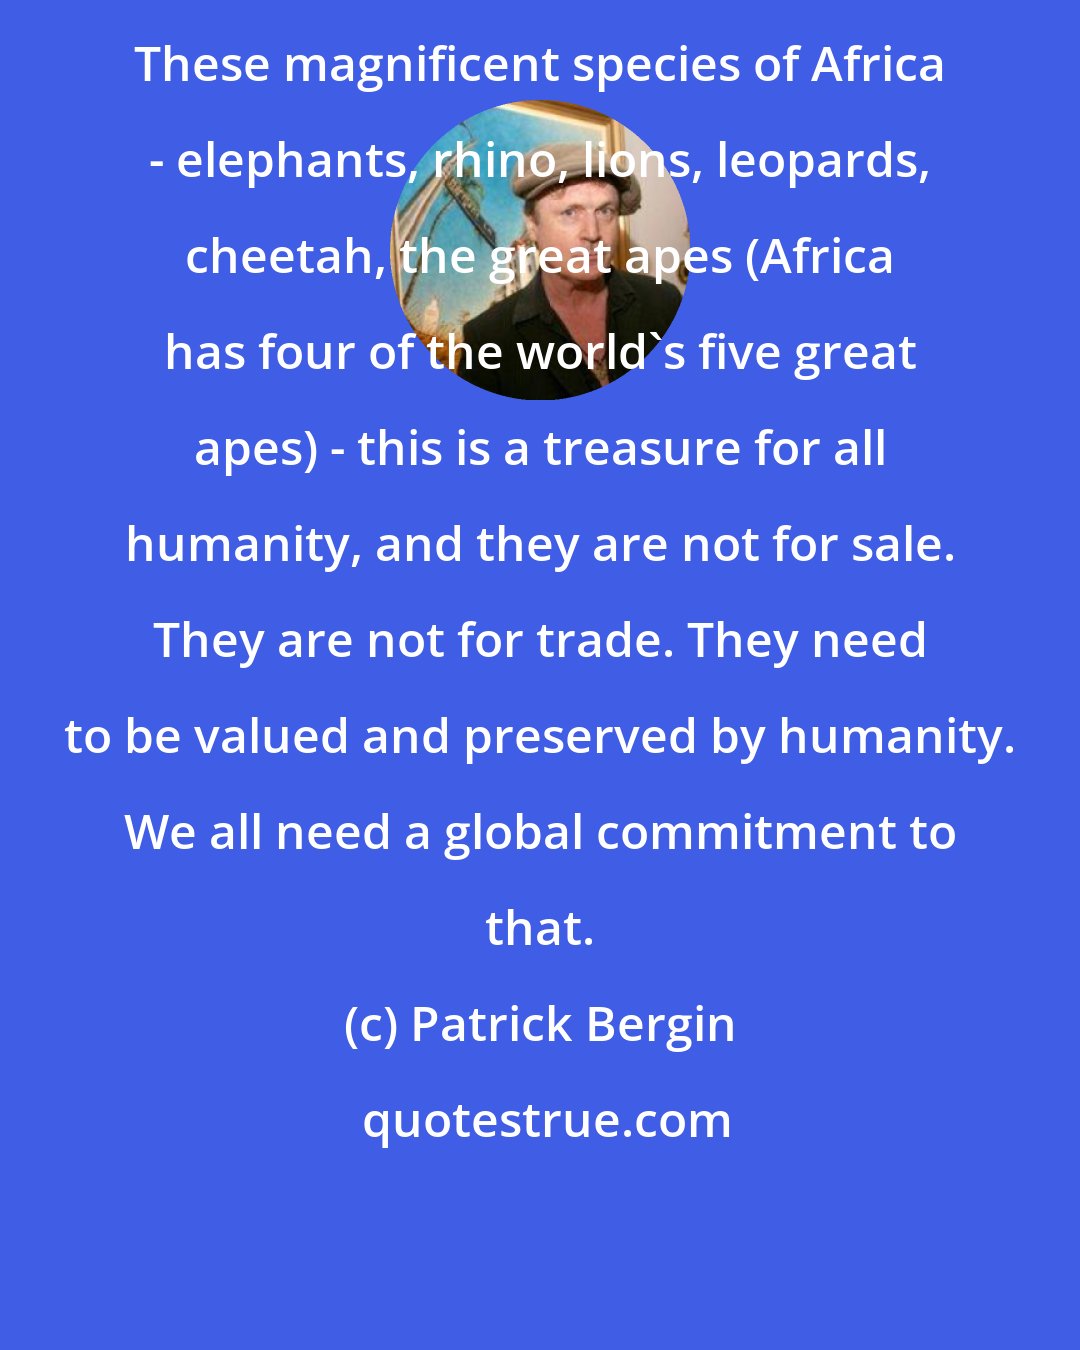 Patrick Bergin: These magnificent species of Africa - elephants, rhino, lions, leopards, cheetah, the great apes (Africa has four of the world's five great apes) - this is a treasure for all humanity, and they are not for sale. They are not for trade. They need to be valued and preserved by humanity. We all need a global commitment to that.